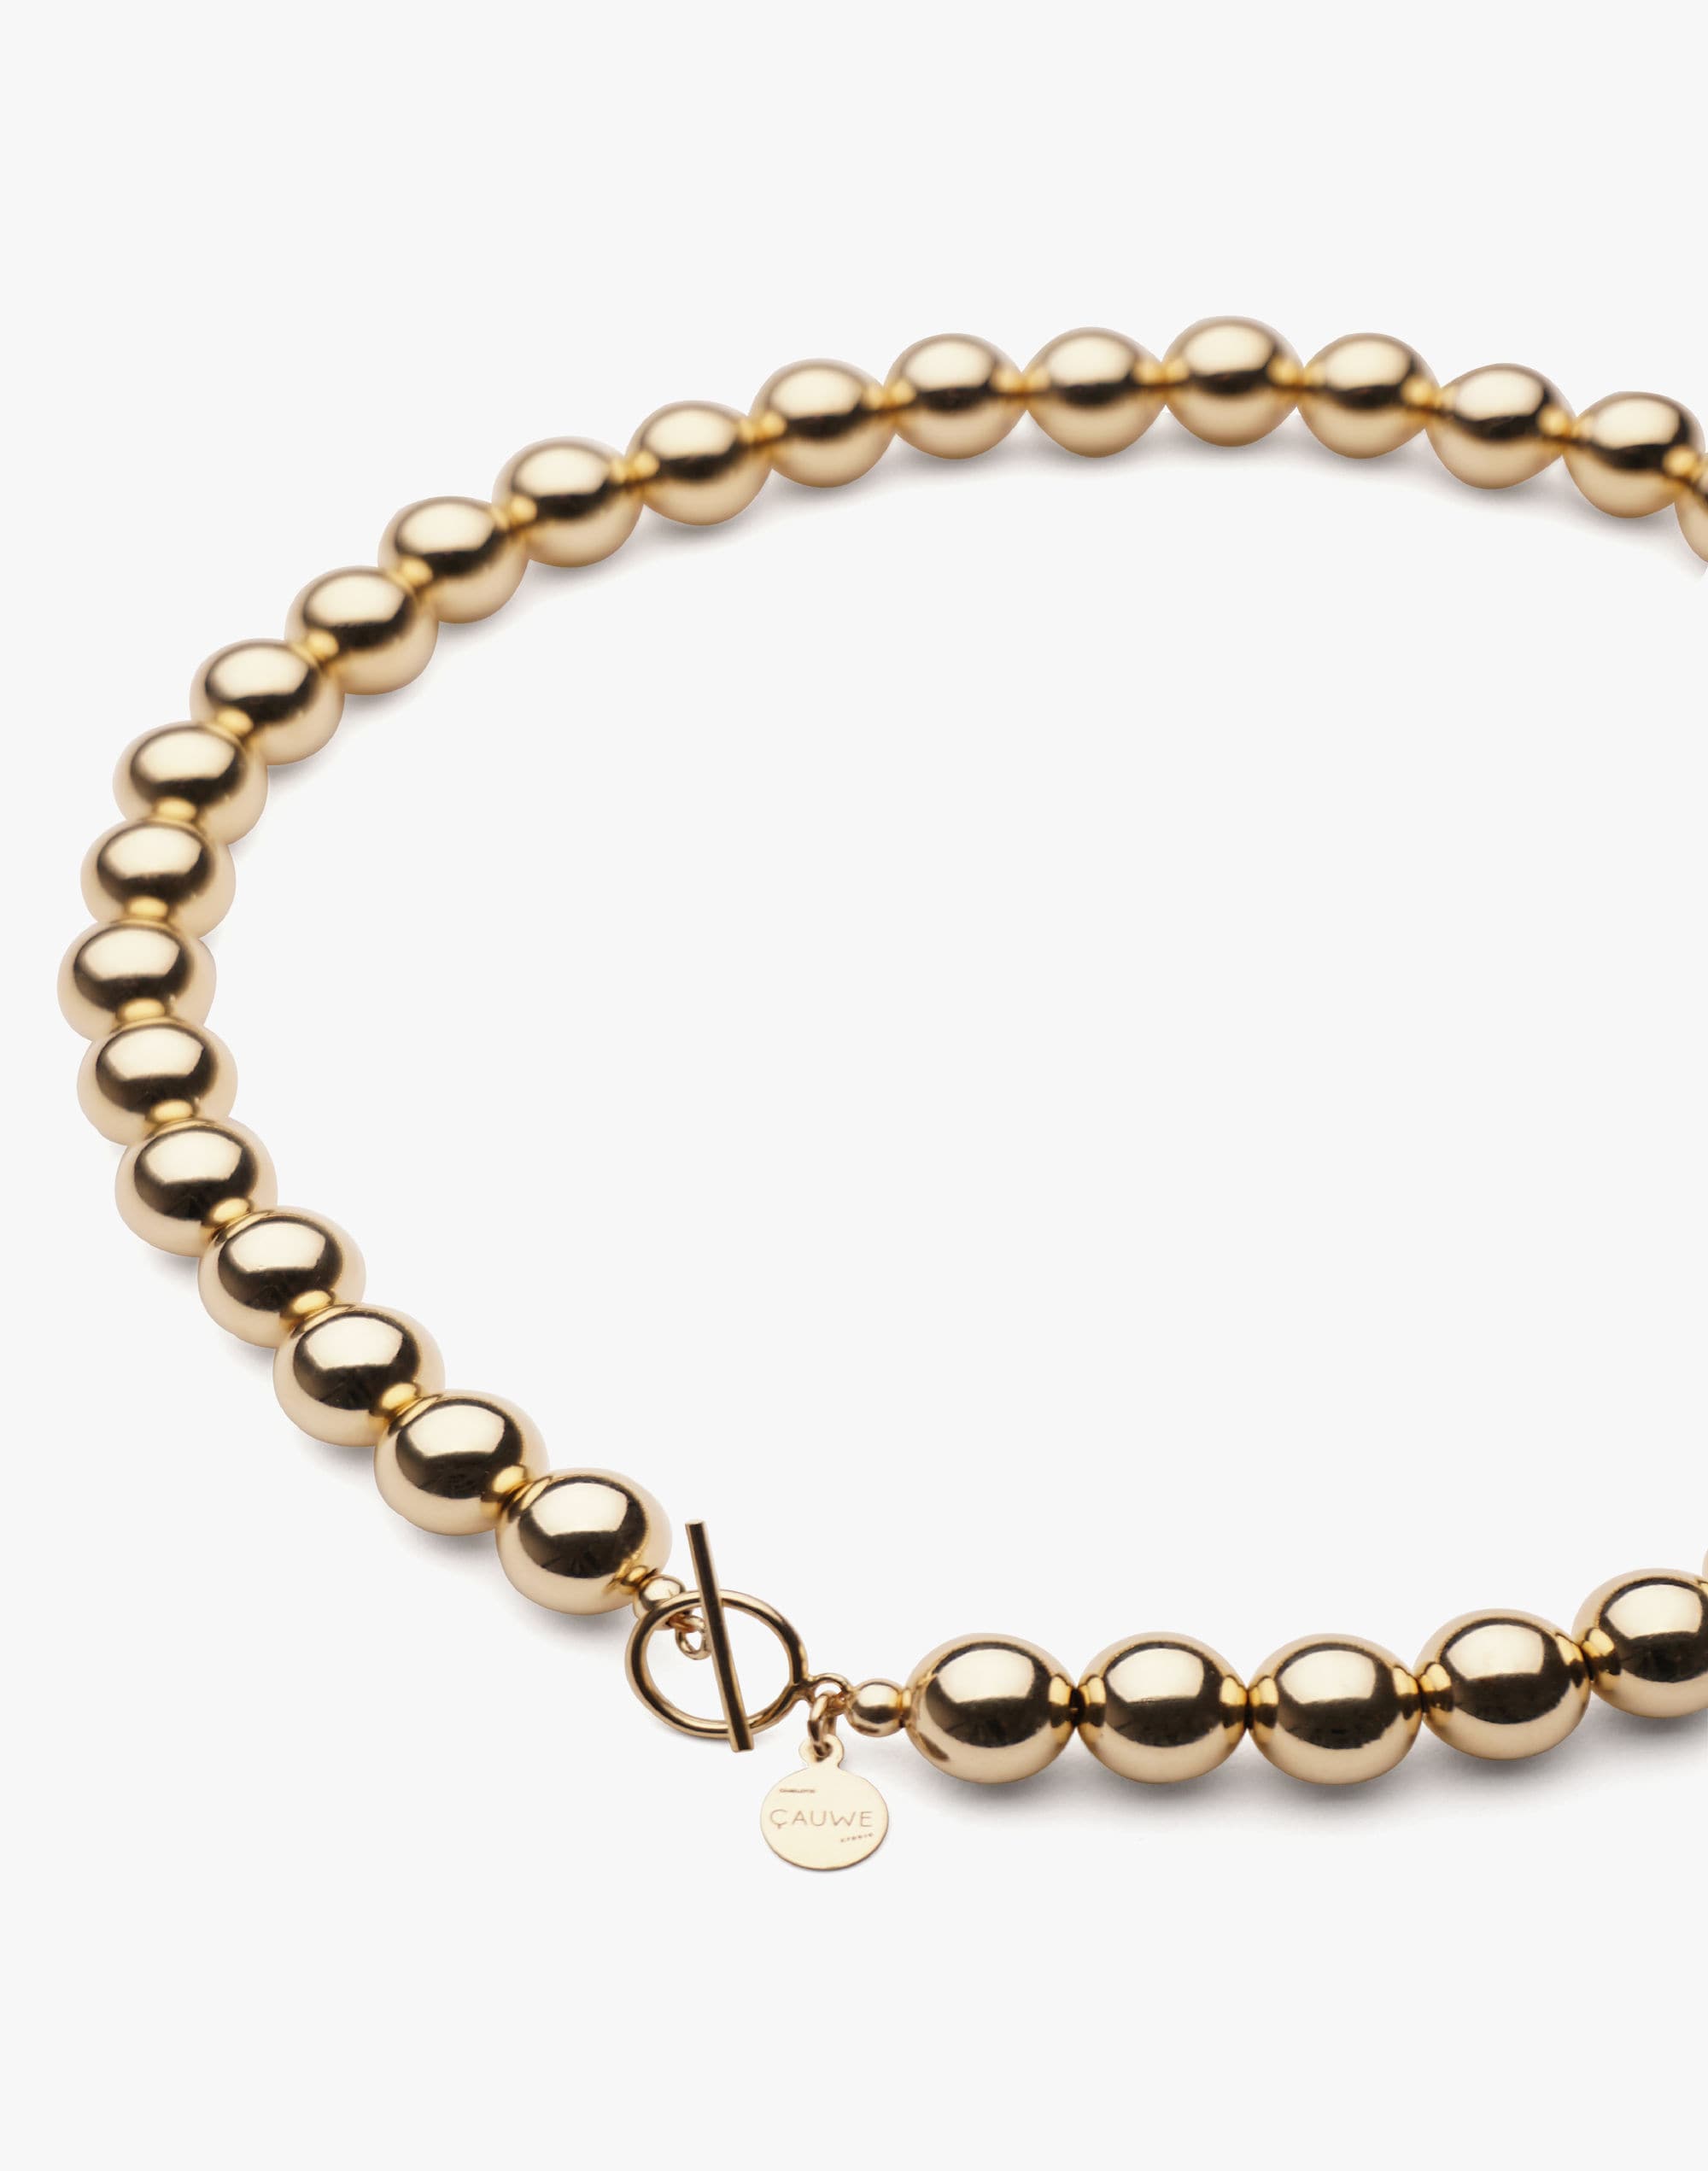 Charlotte Cauwe Studio Bead Necklace in Gold 10mm